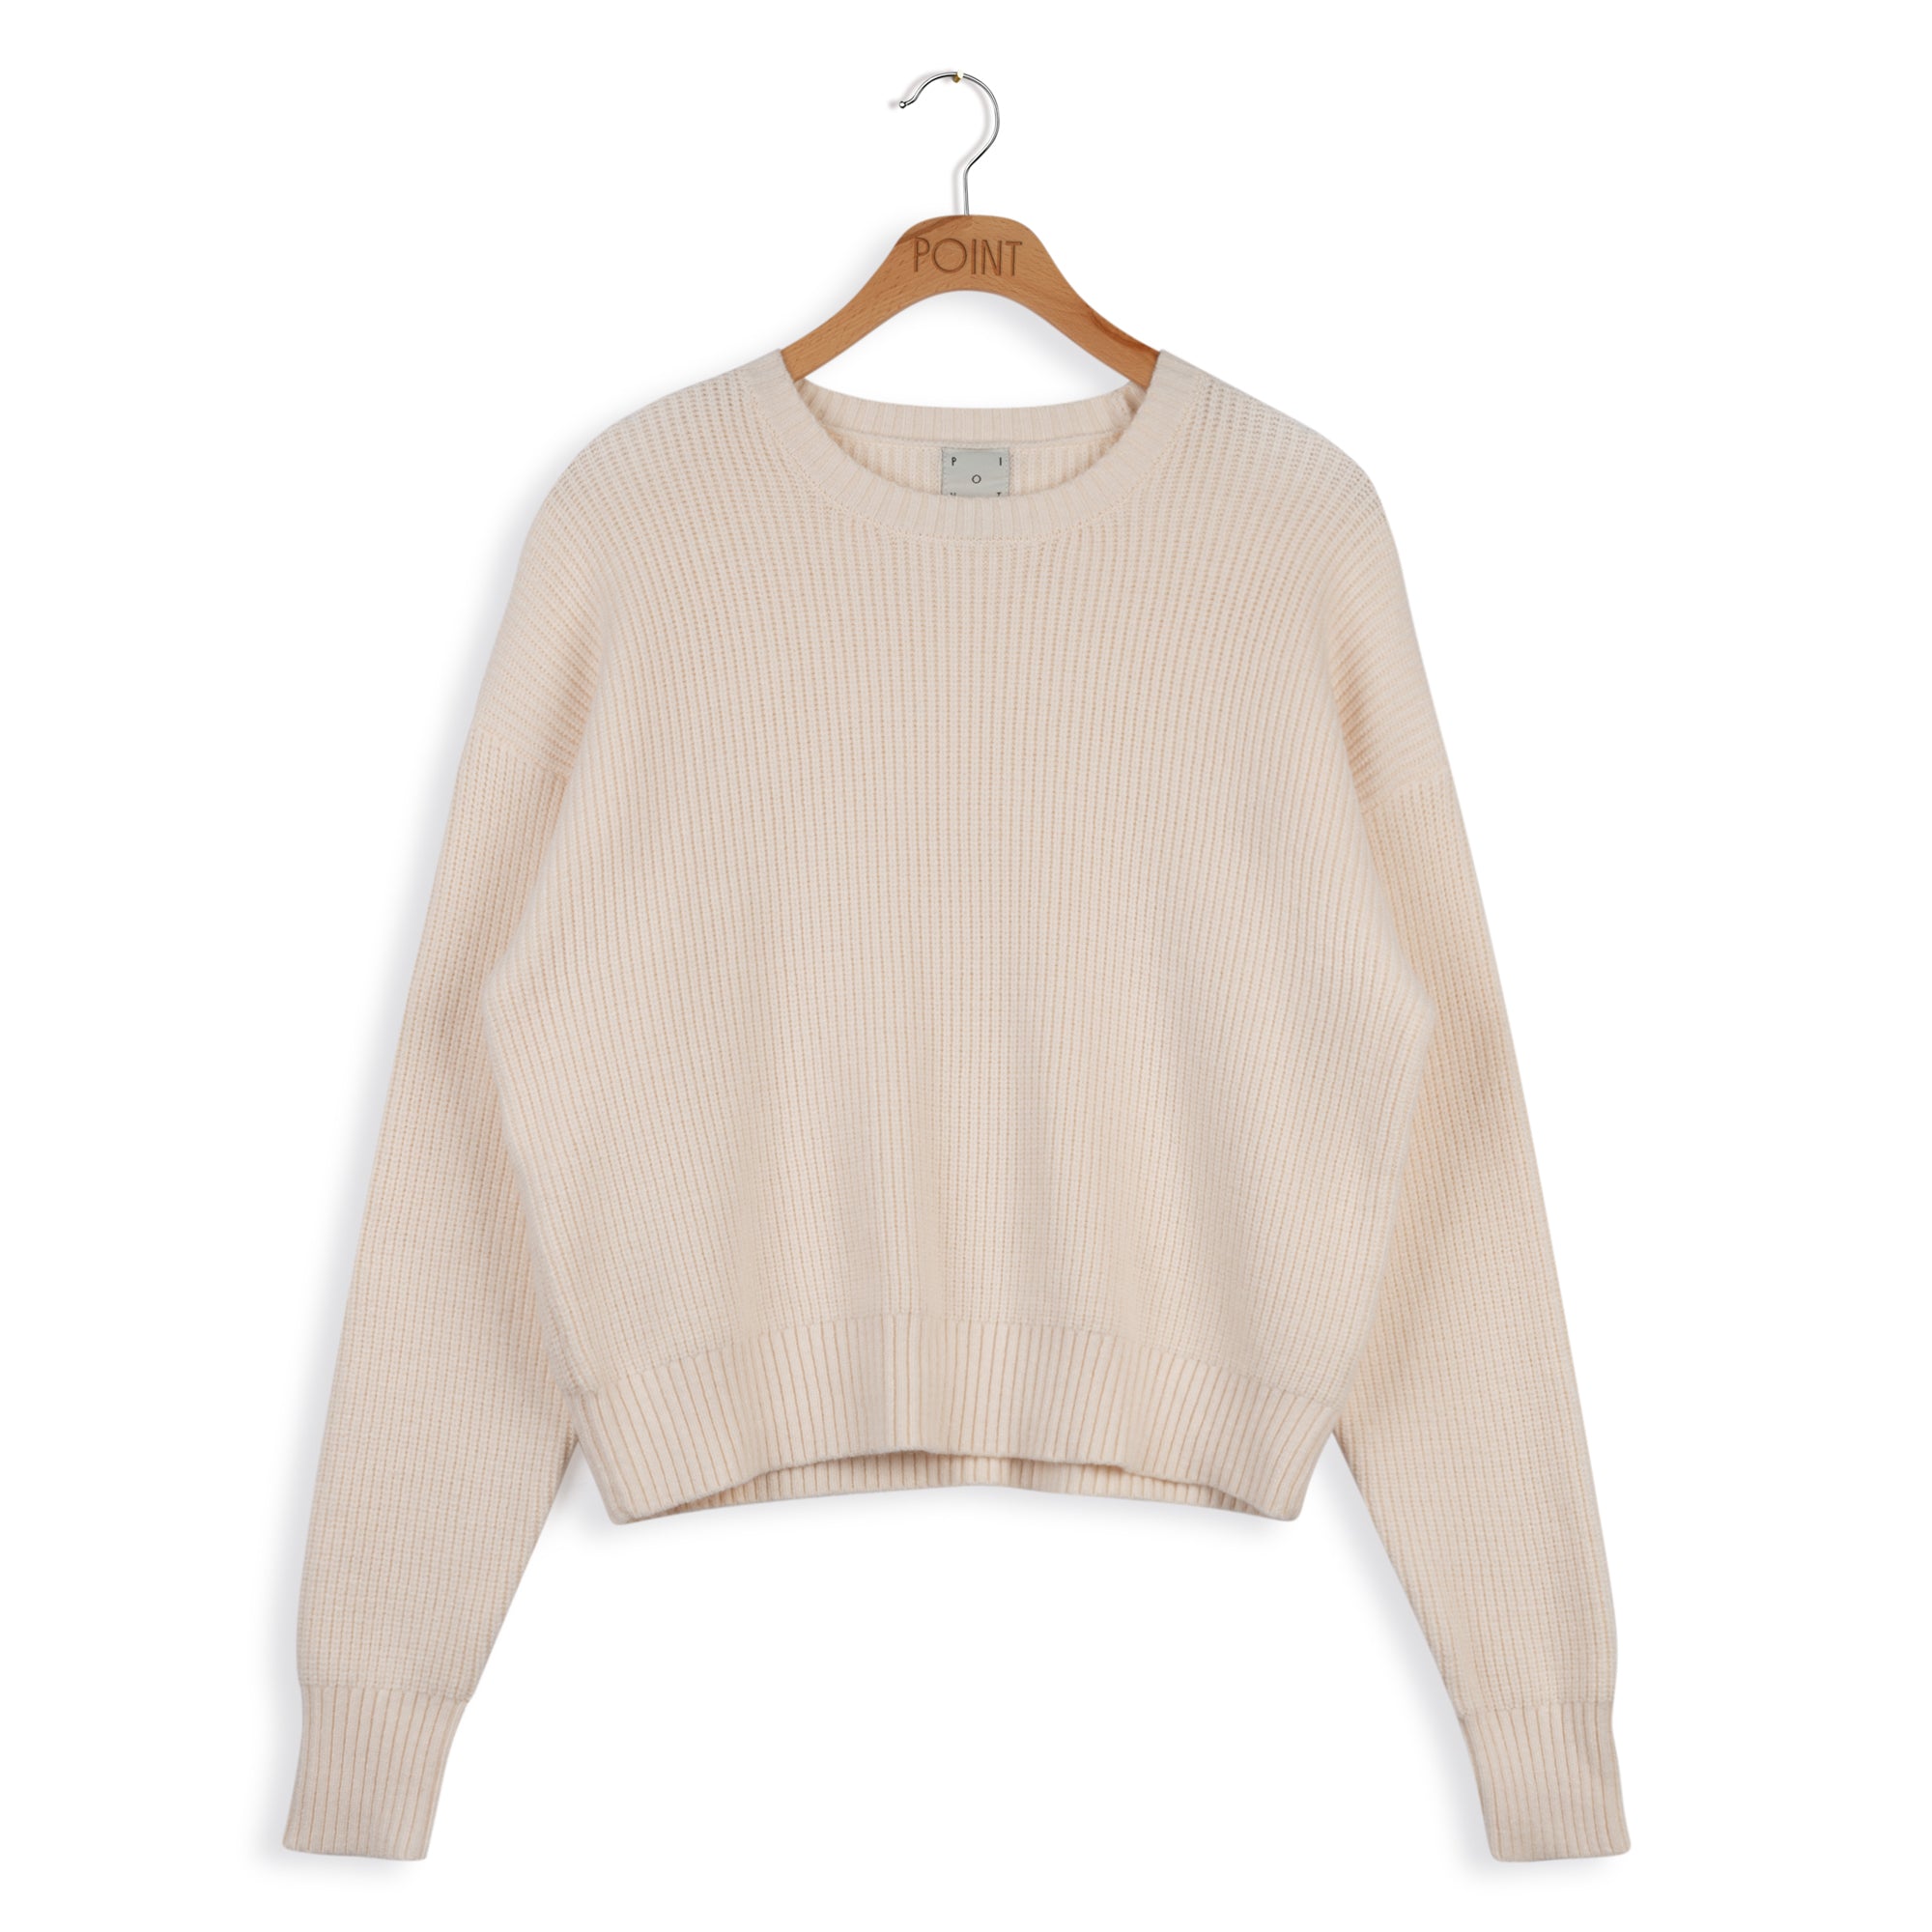 Point Chunky Crew Sweater